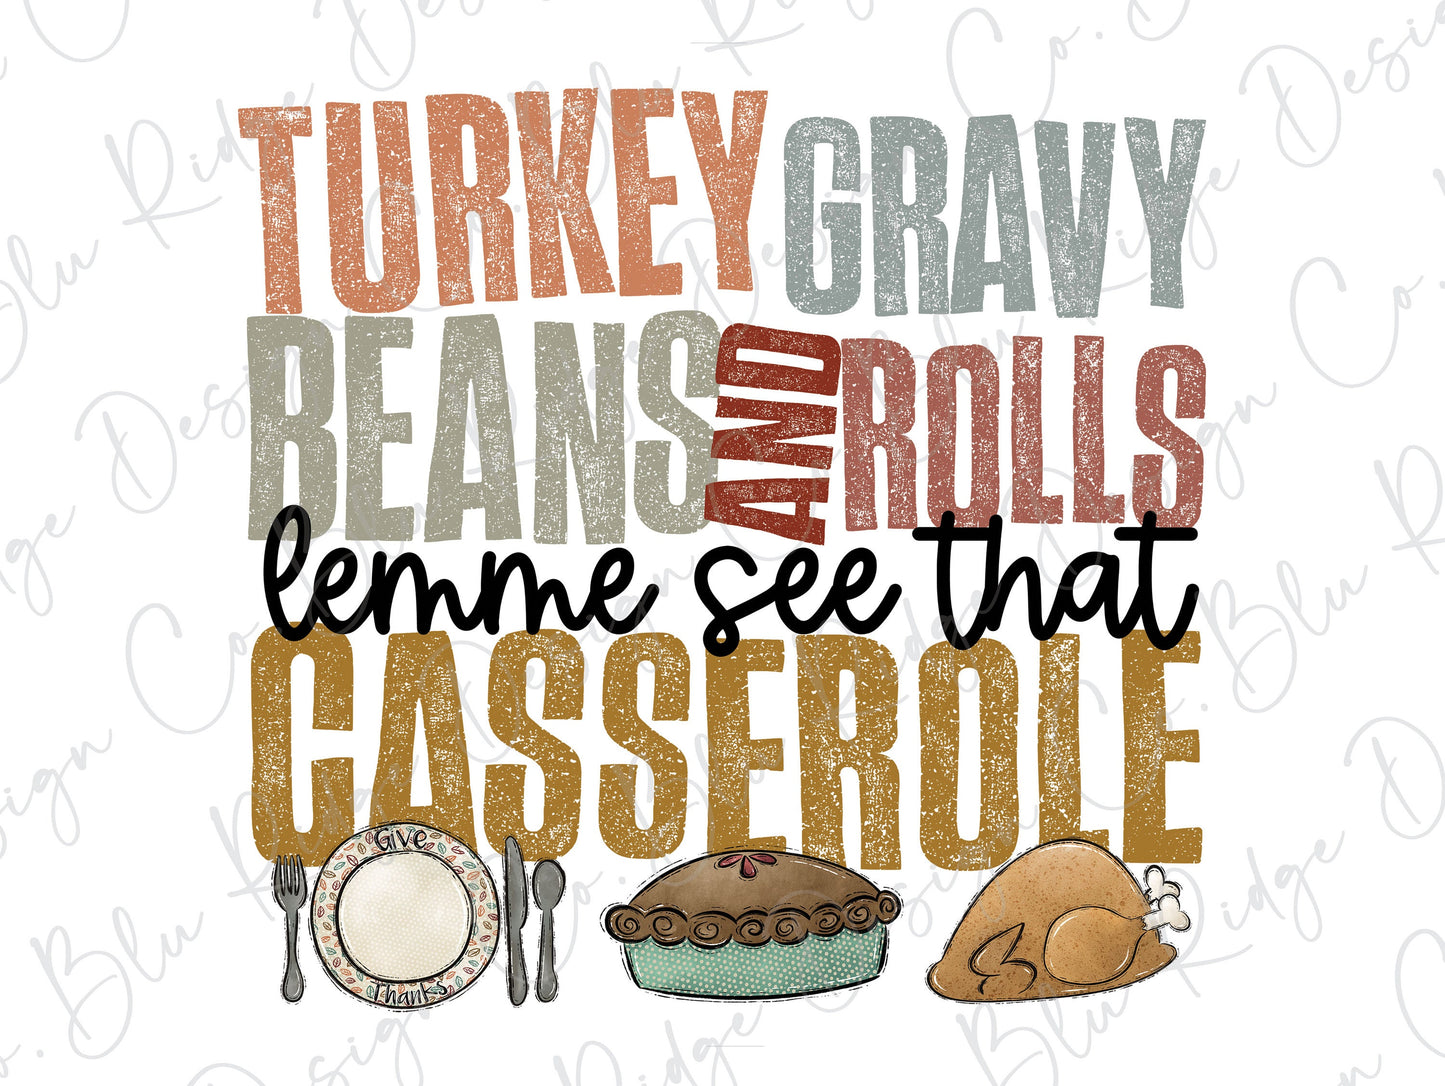 Turkey Gravy Beans and Rolls Lemme See that Casserole Direct to Film (DTF) Transfer